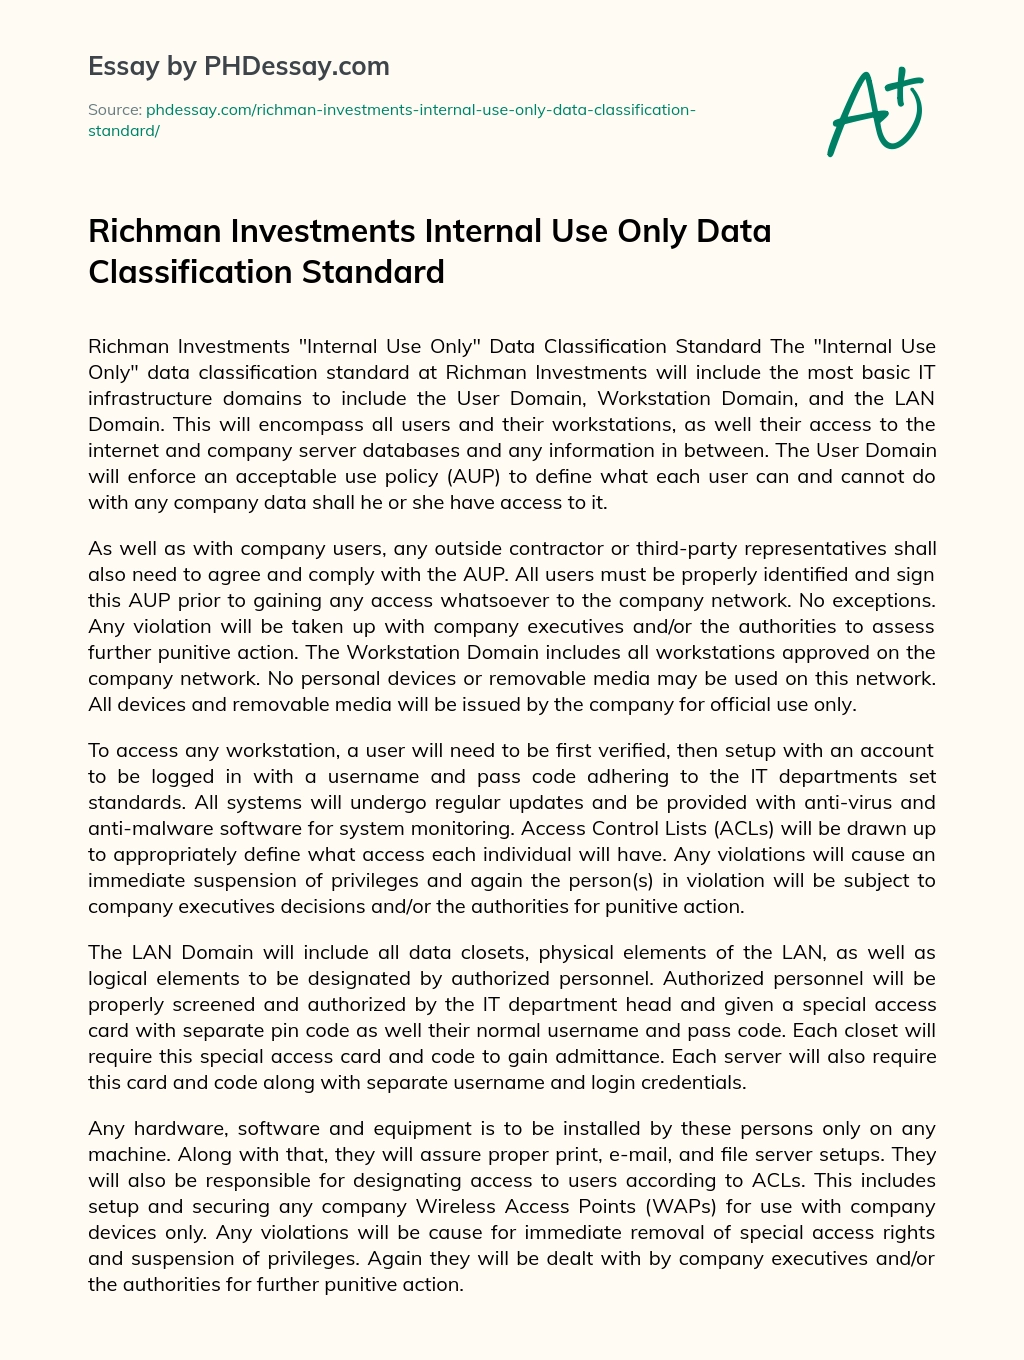 Richman Investments Internal Use Only Data Classification Standard essay